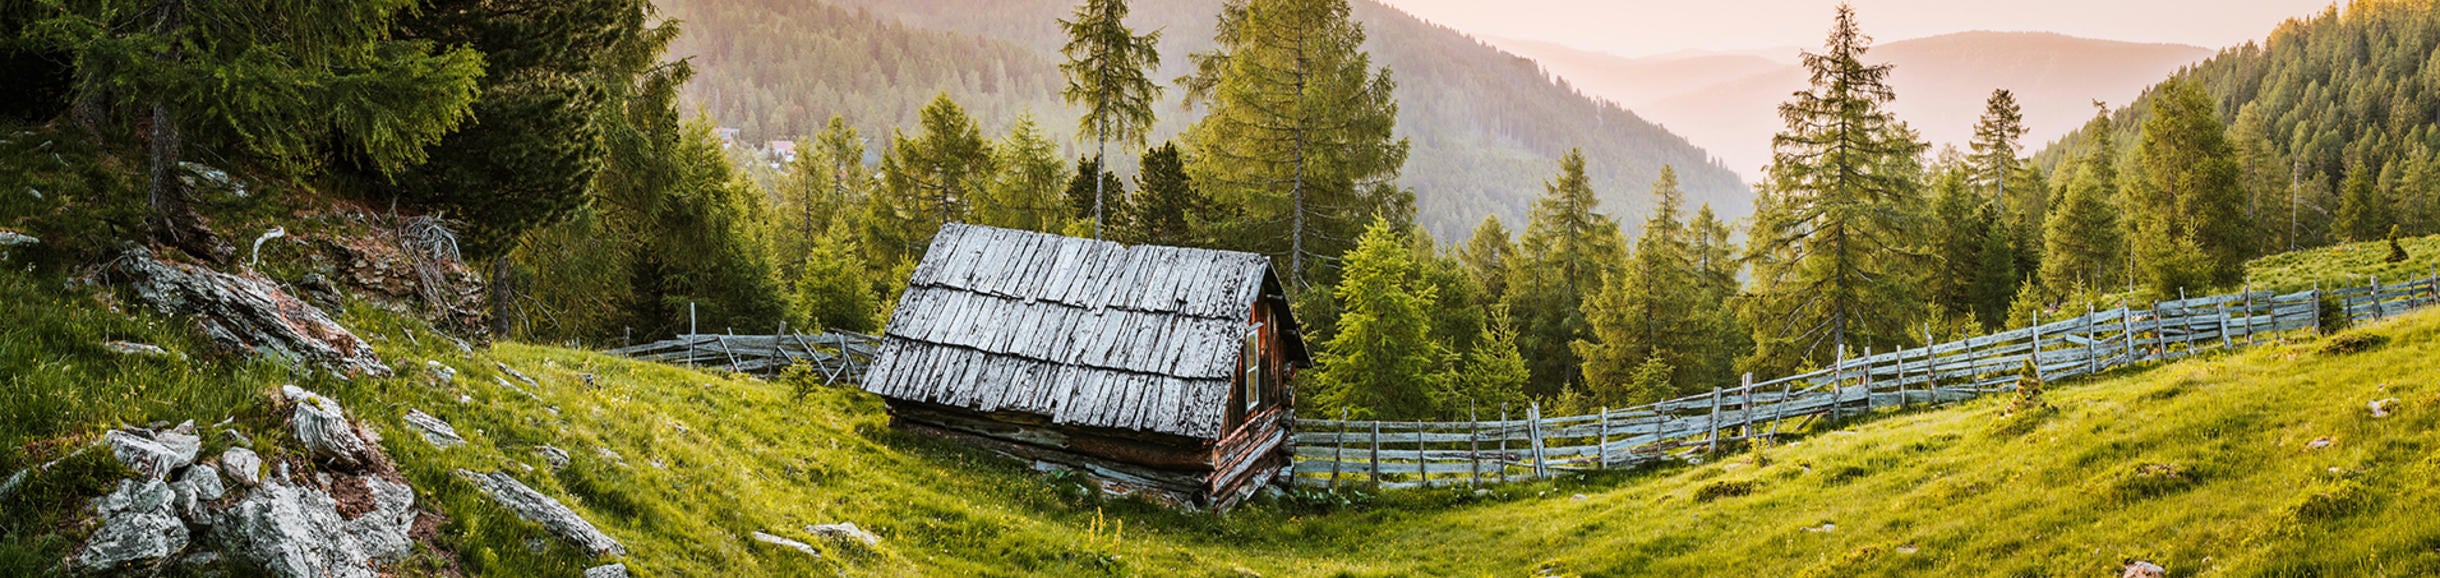 brown wooden house in the mountains (c) pexels